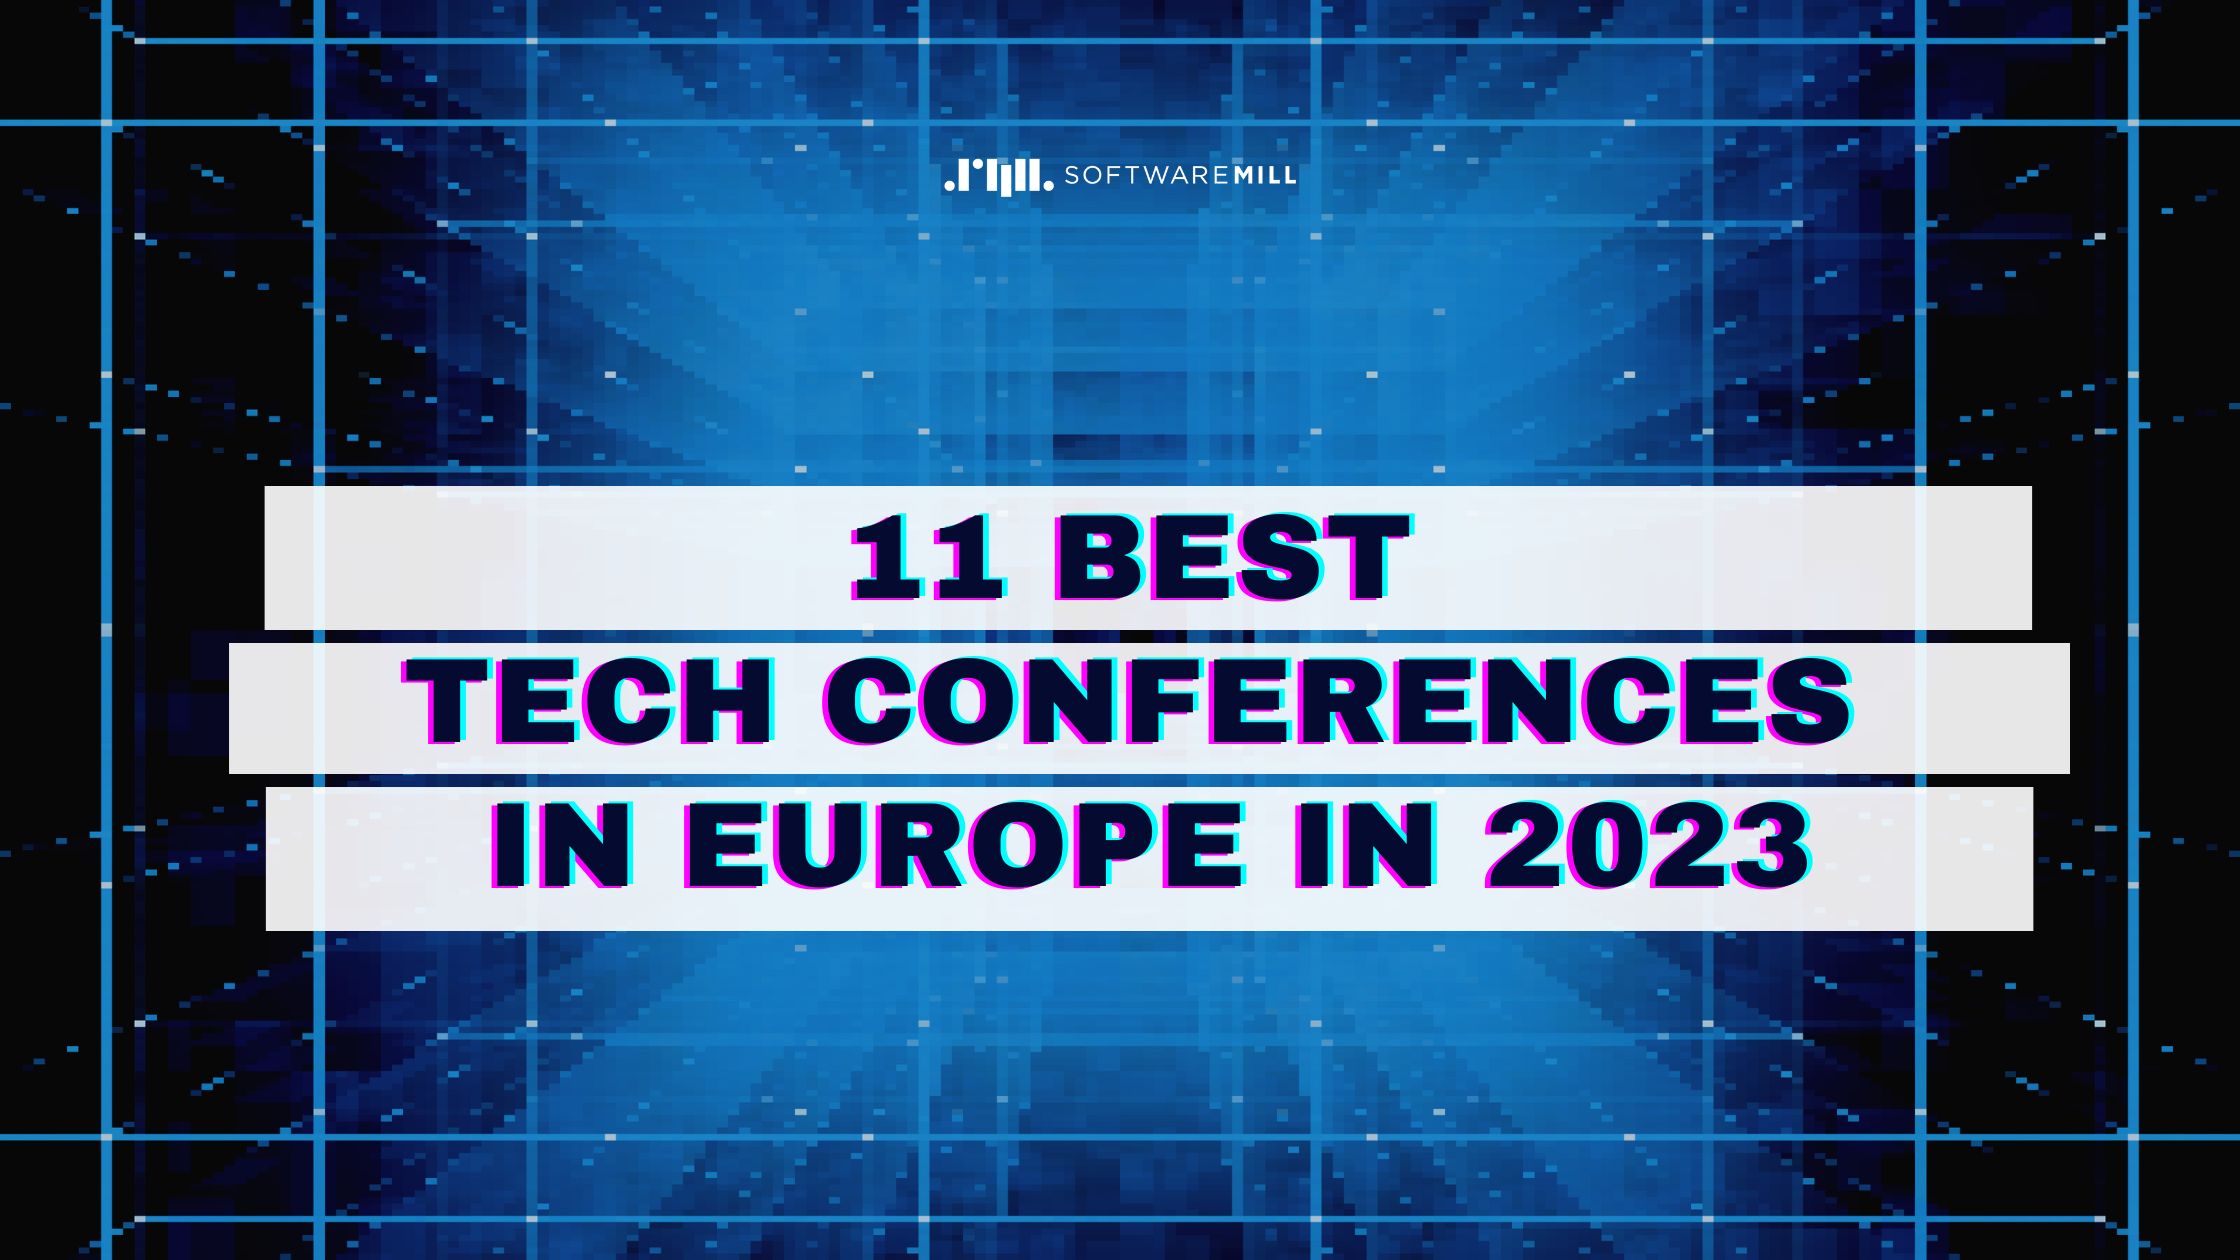 11 best tech conferences in Europe in 2023 webp image